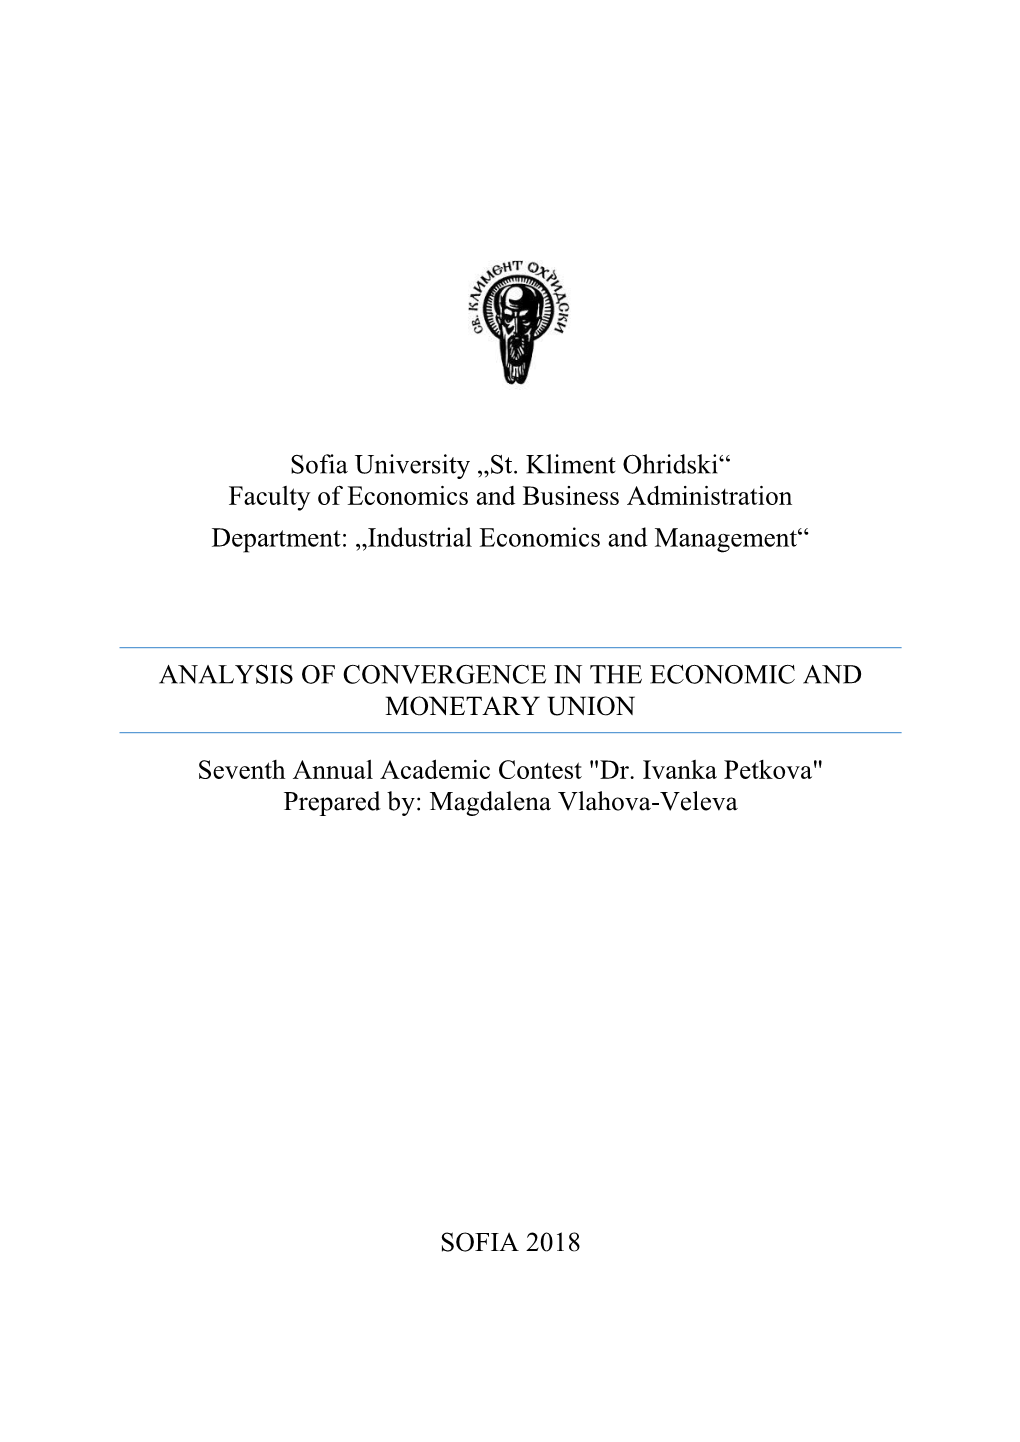 Analysis of Convergence in the Economic and Monetary Union